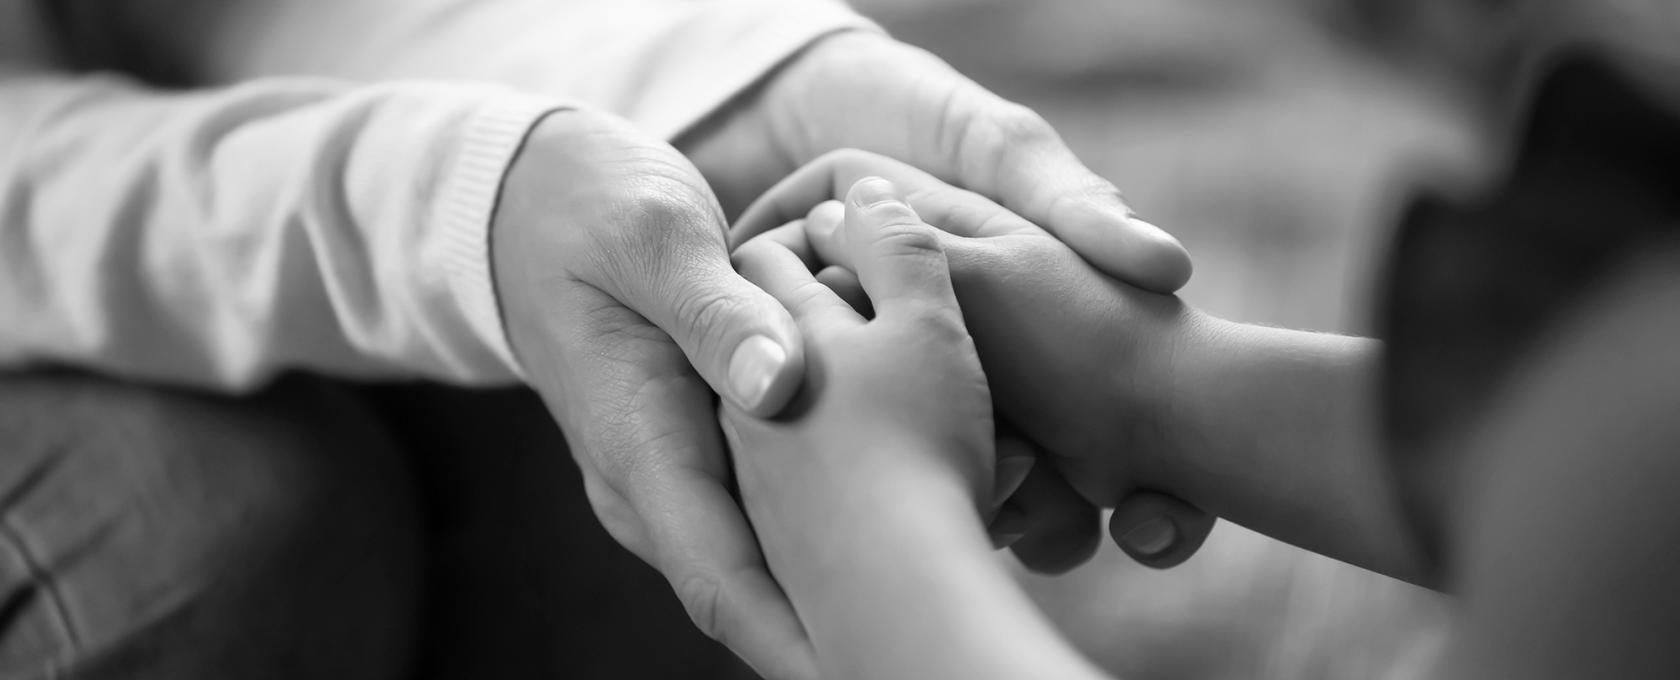 Adult holding the hands of a child